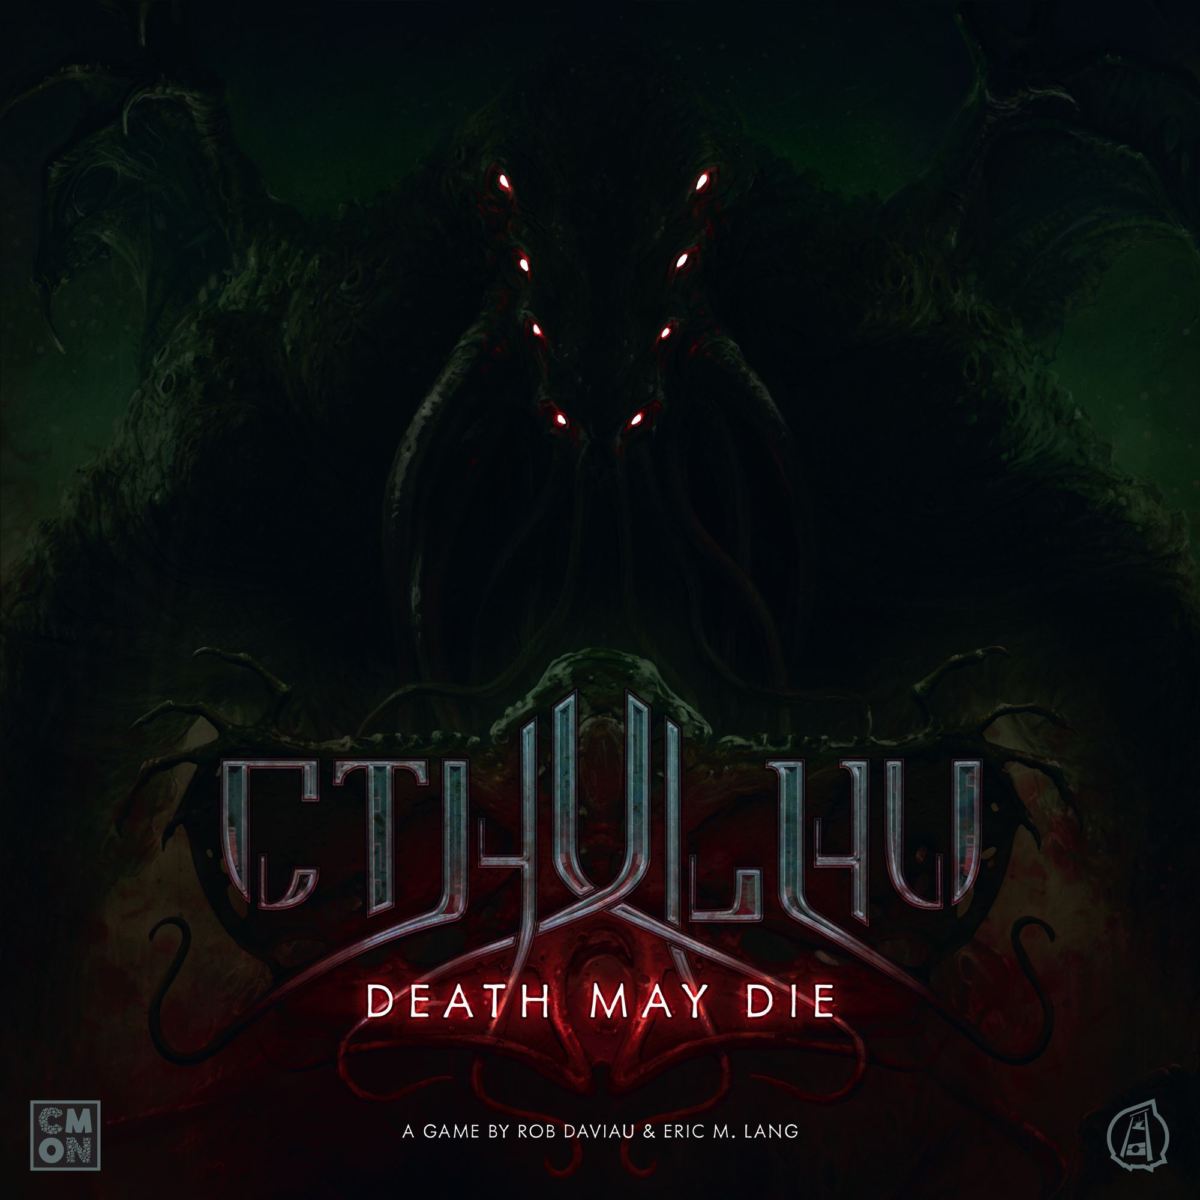 cthulhu death may die cover